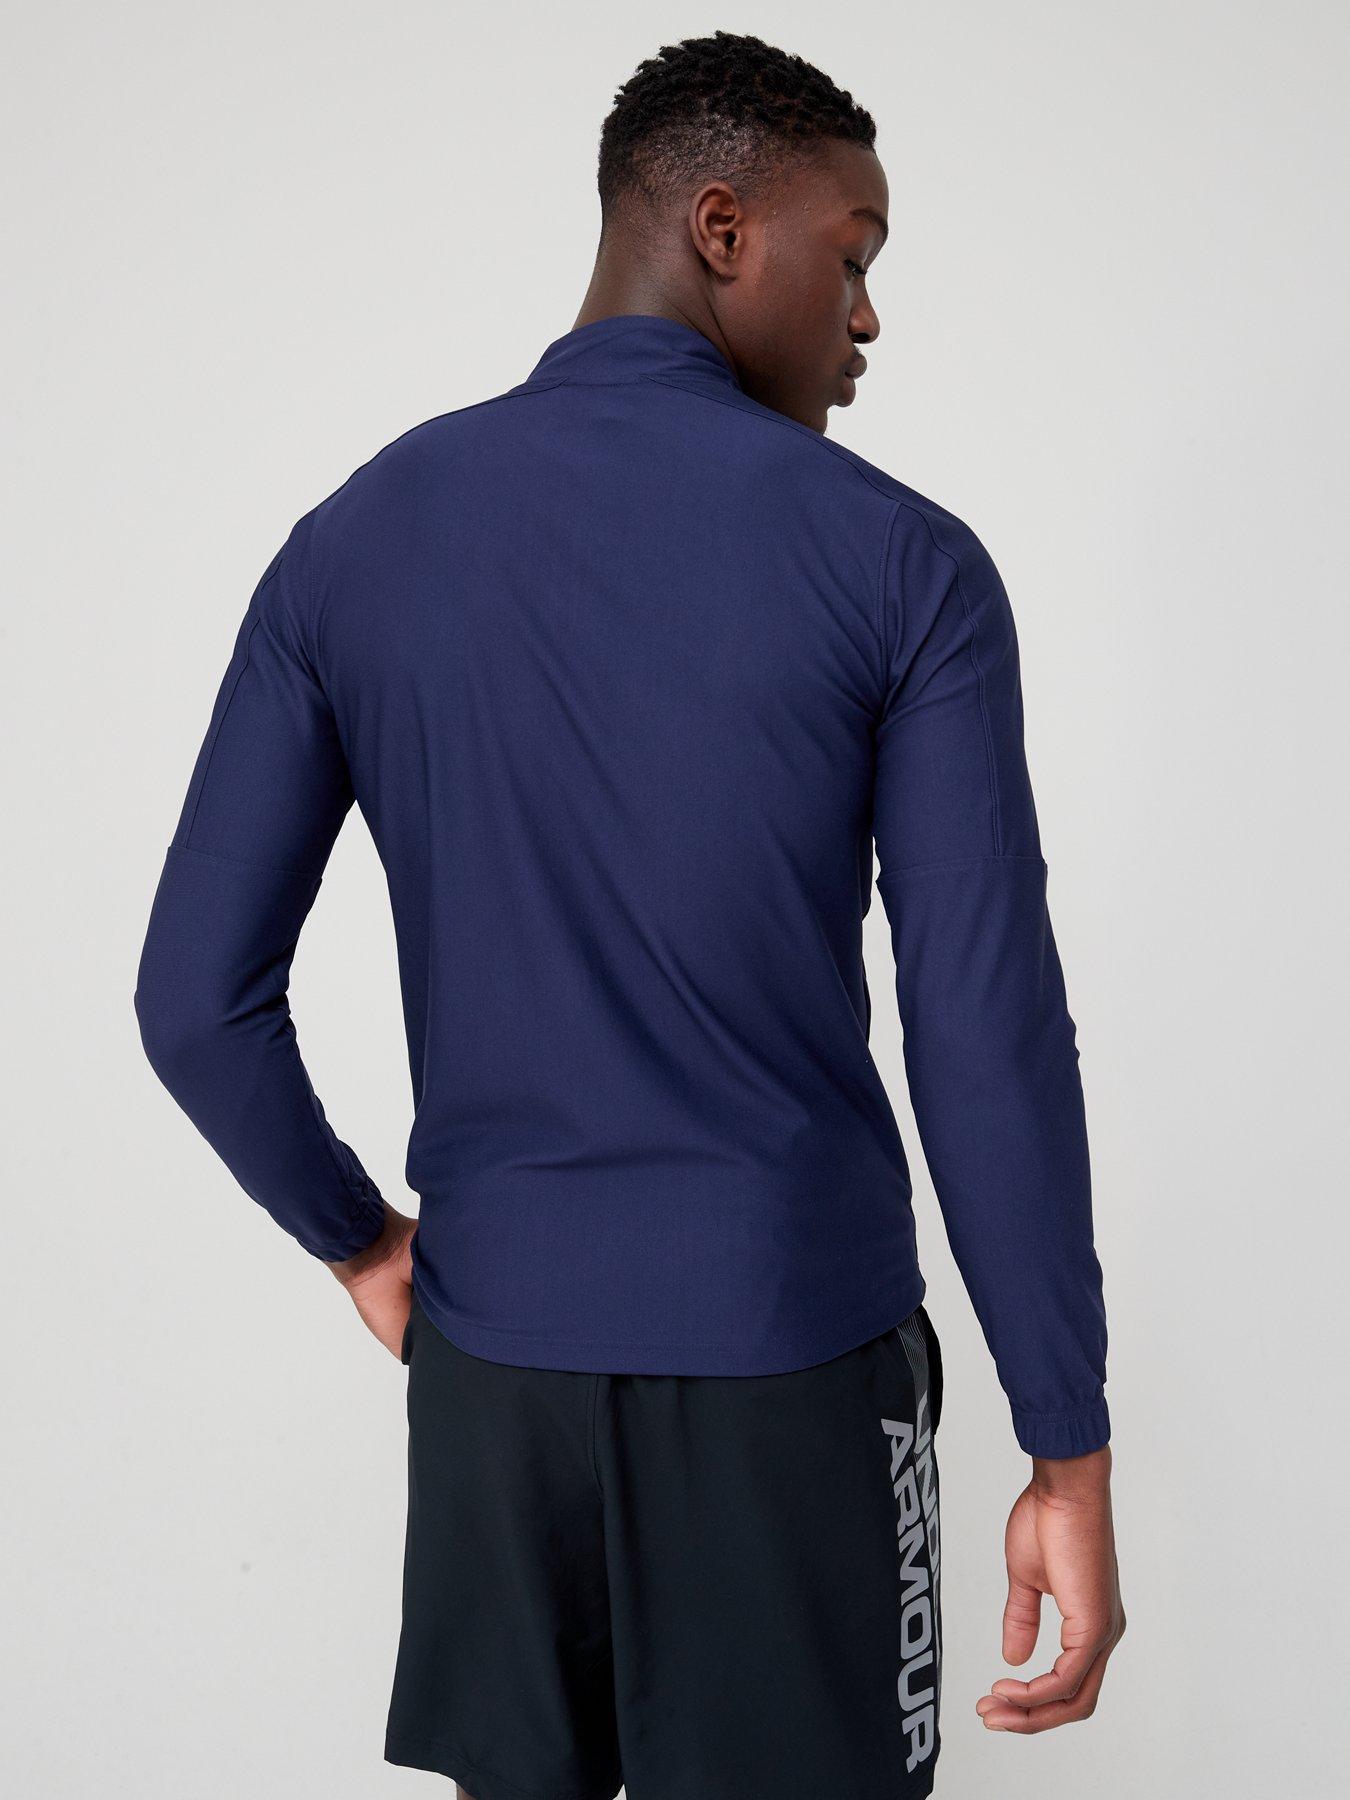 UNDER ARMOUR Challenger Track Jacket - Navy | very.co.uk